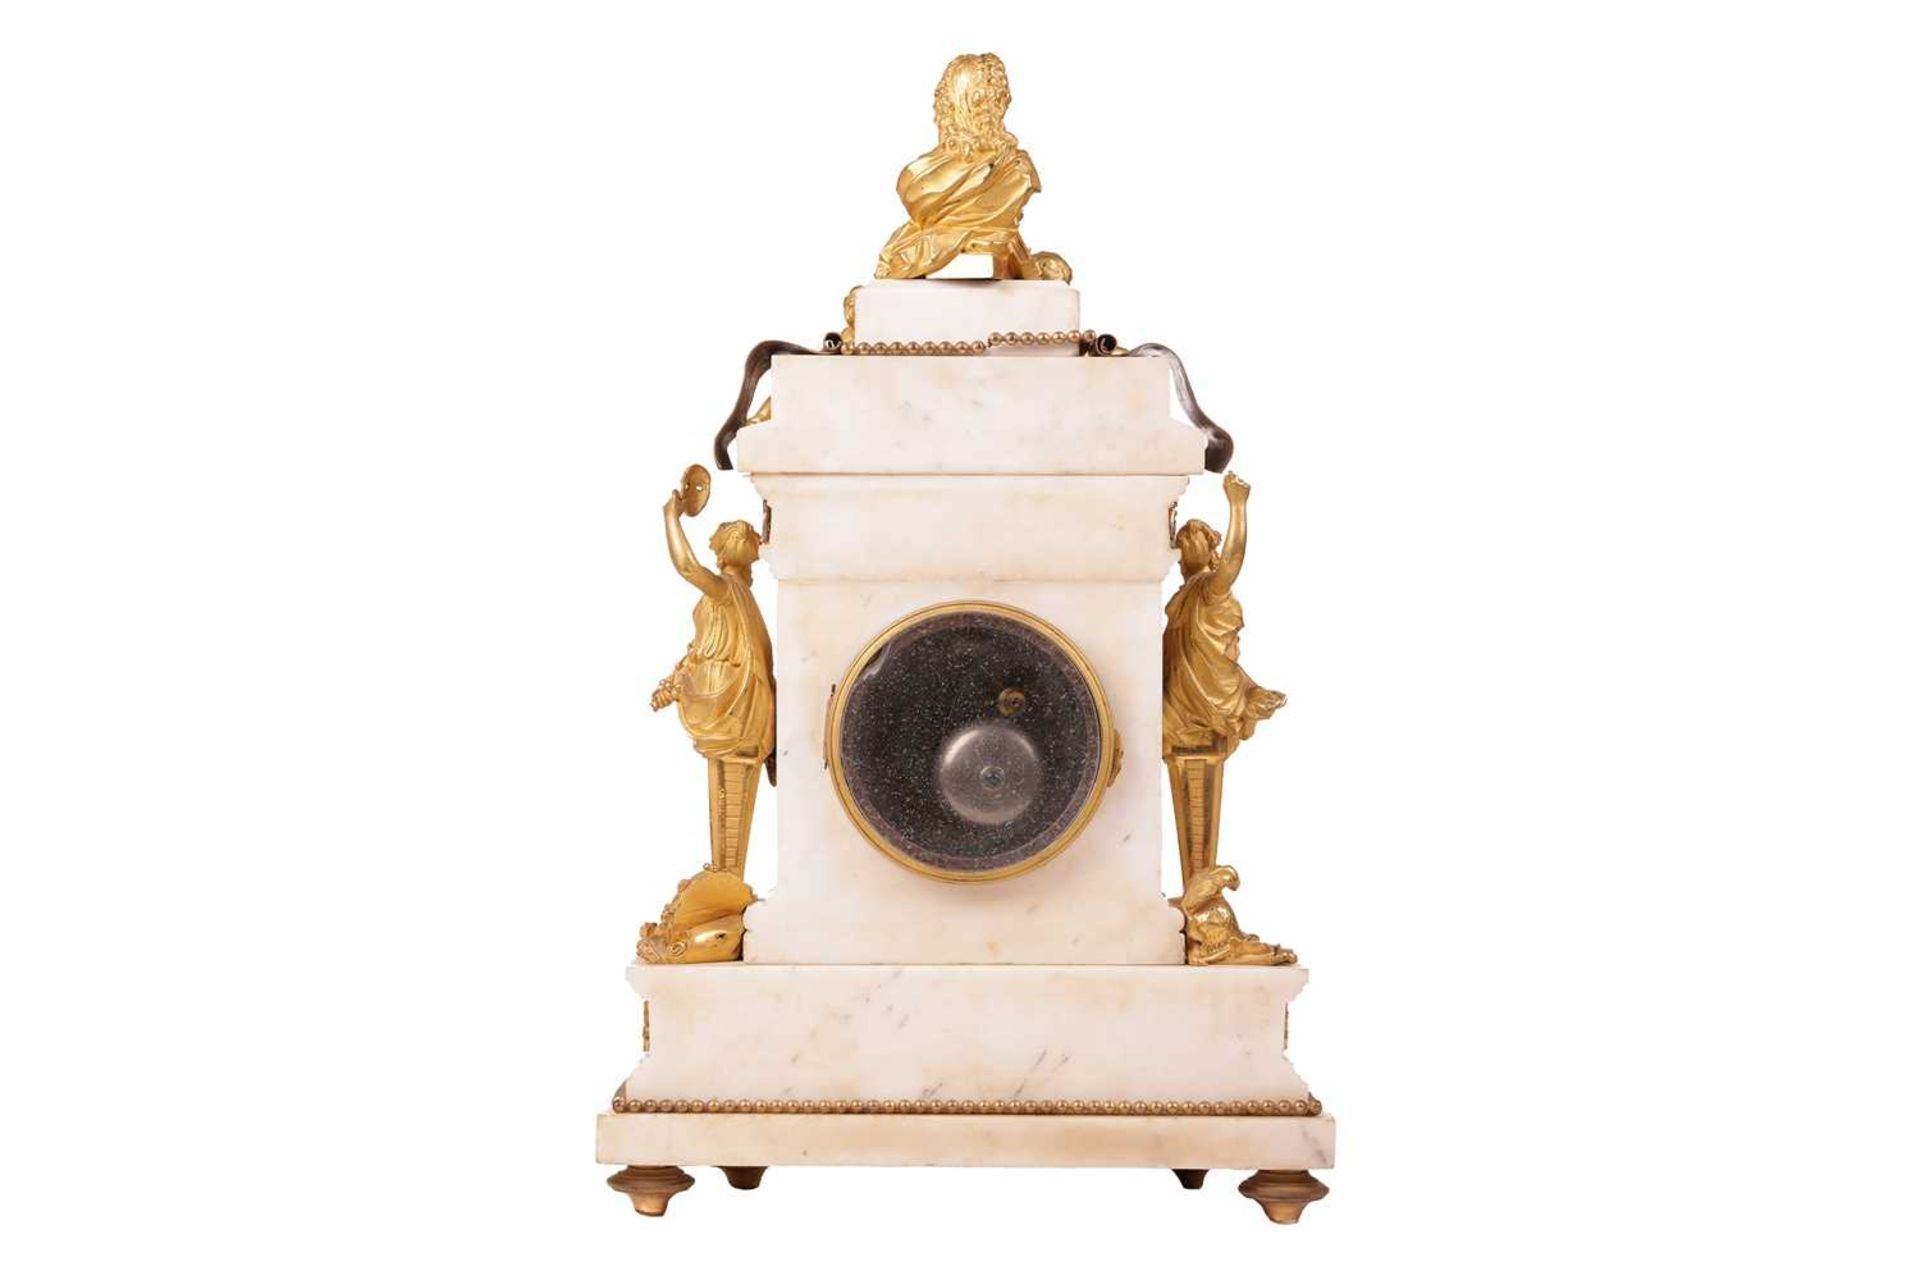 A large and ornate Louis XVI French marble and ormolu-mounted figural mantle clock, of architectural - Image 5 of 23